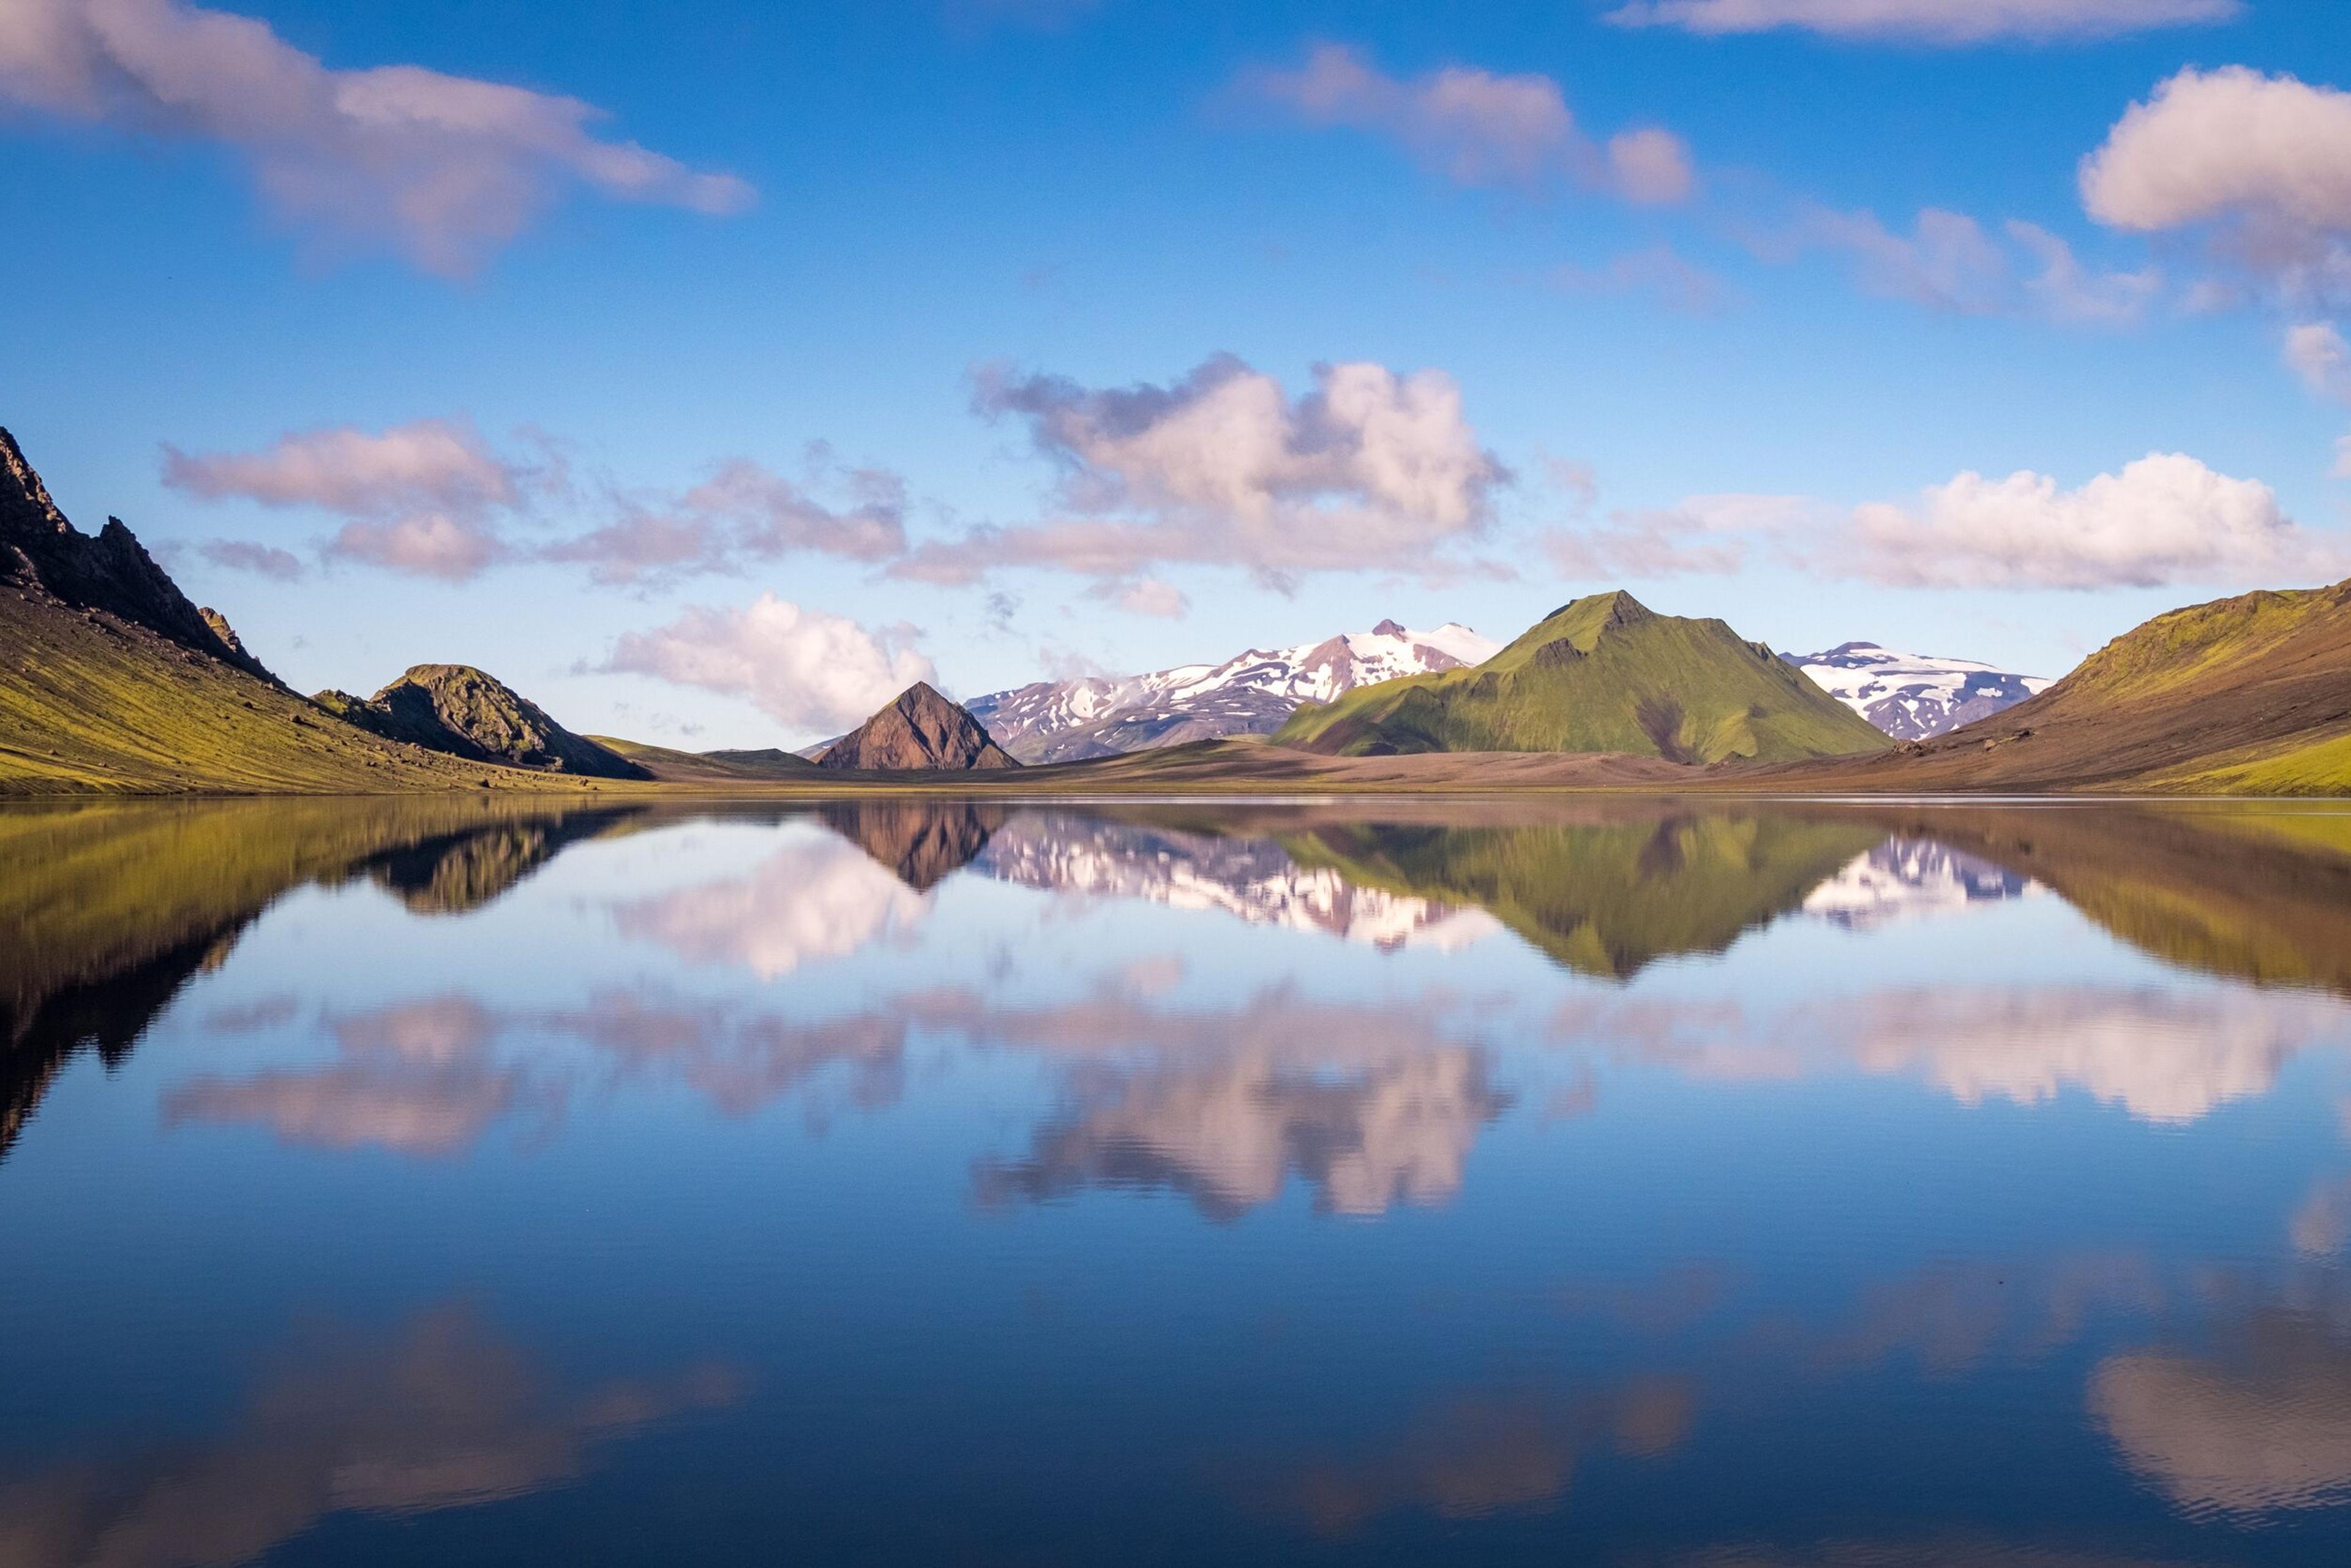 "Stunning landscape of mountains reflecting perfectly in the calm waters of a lake.